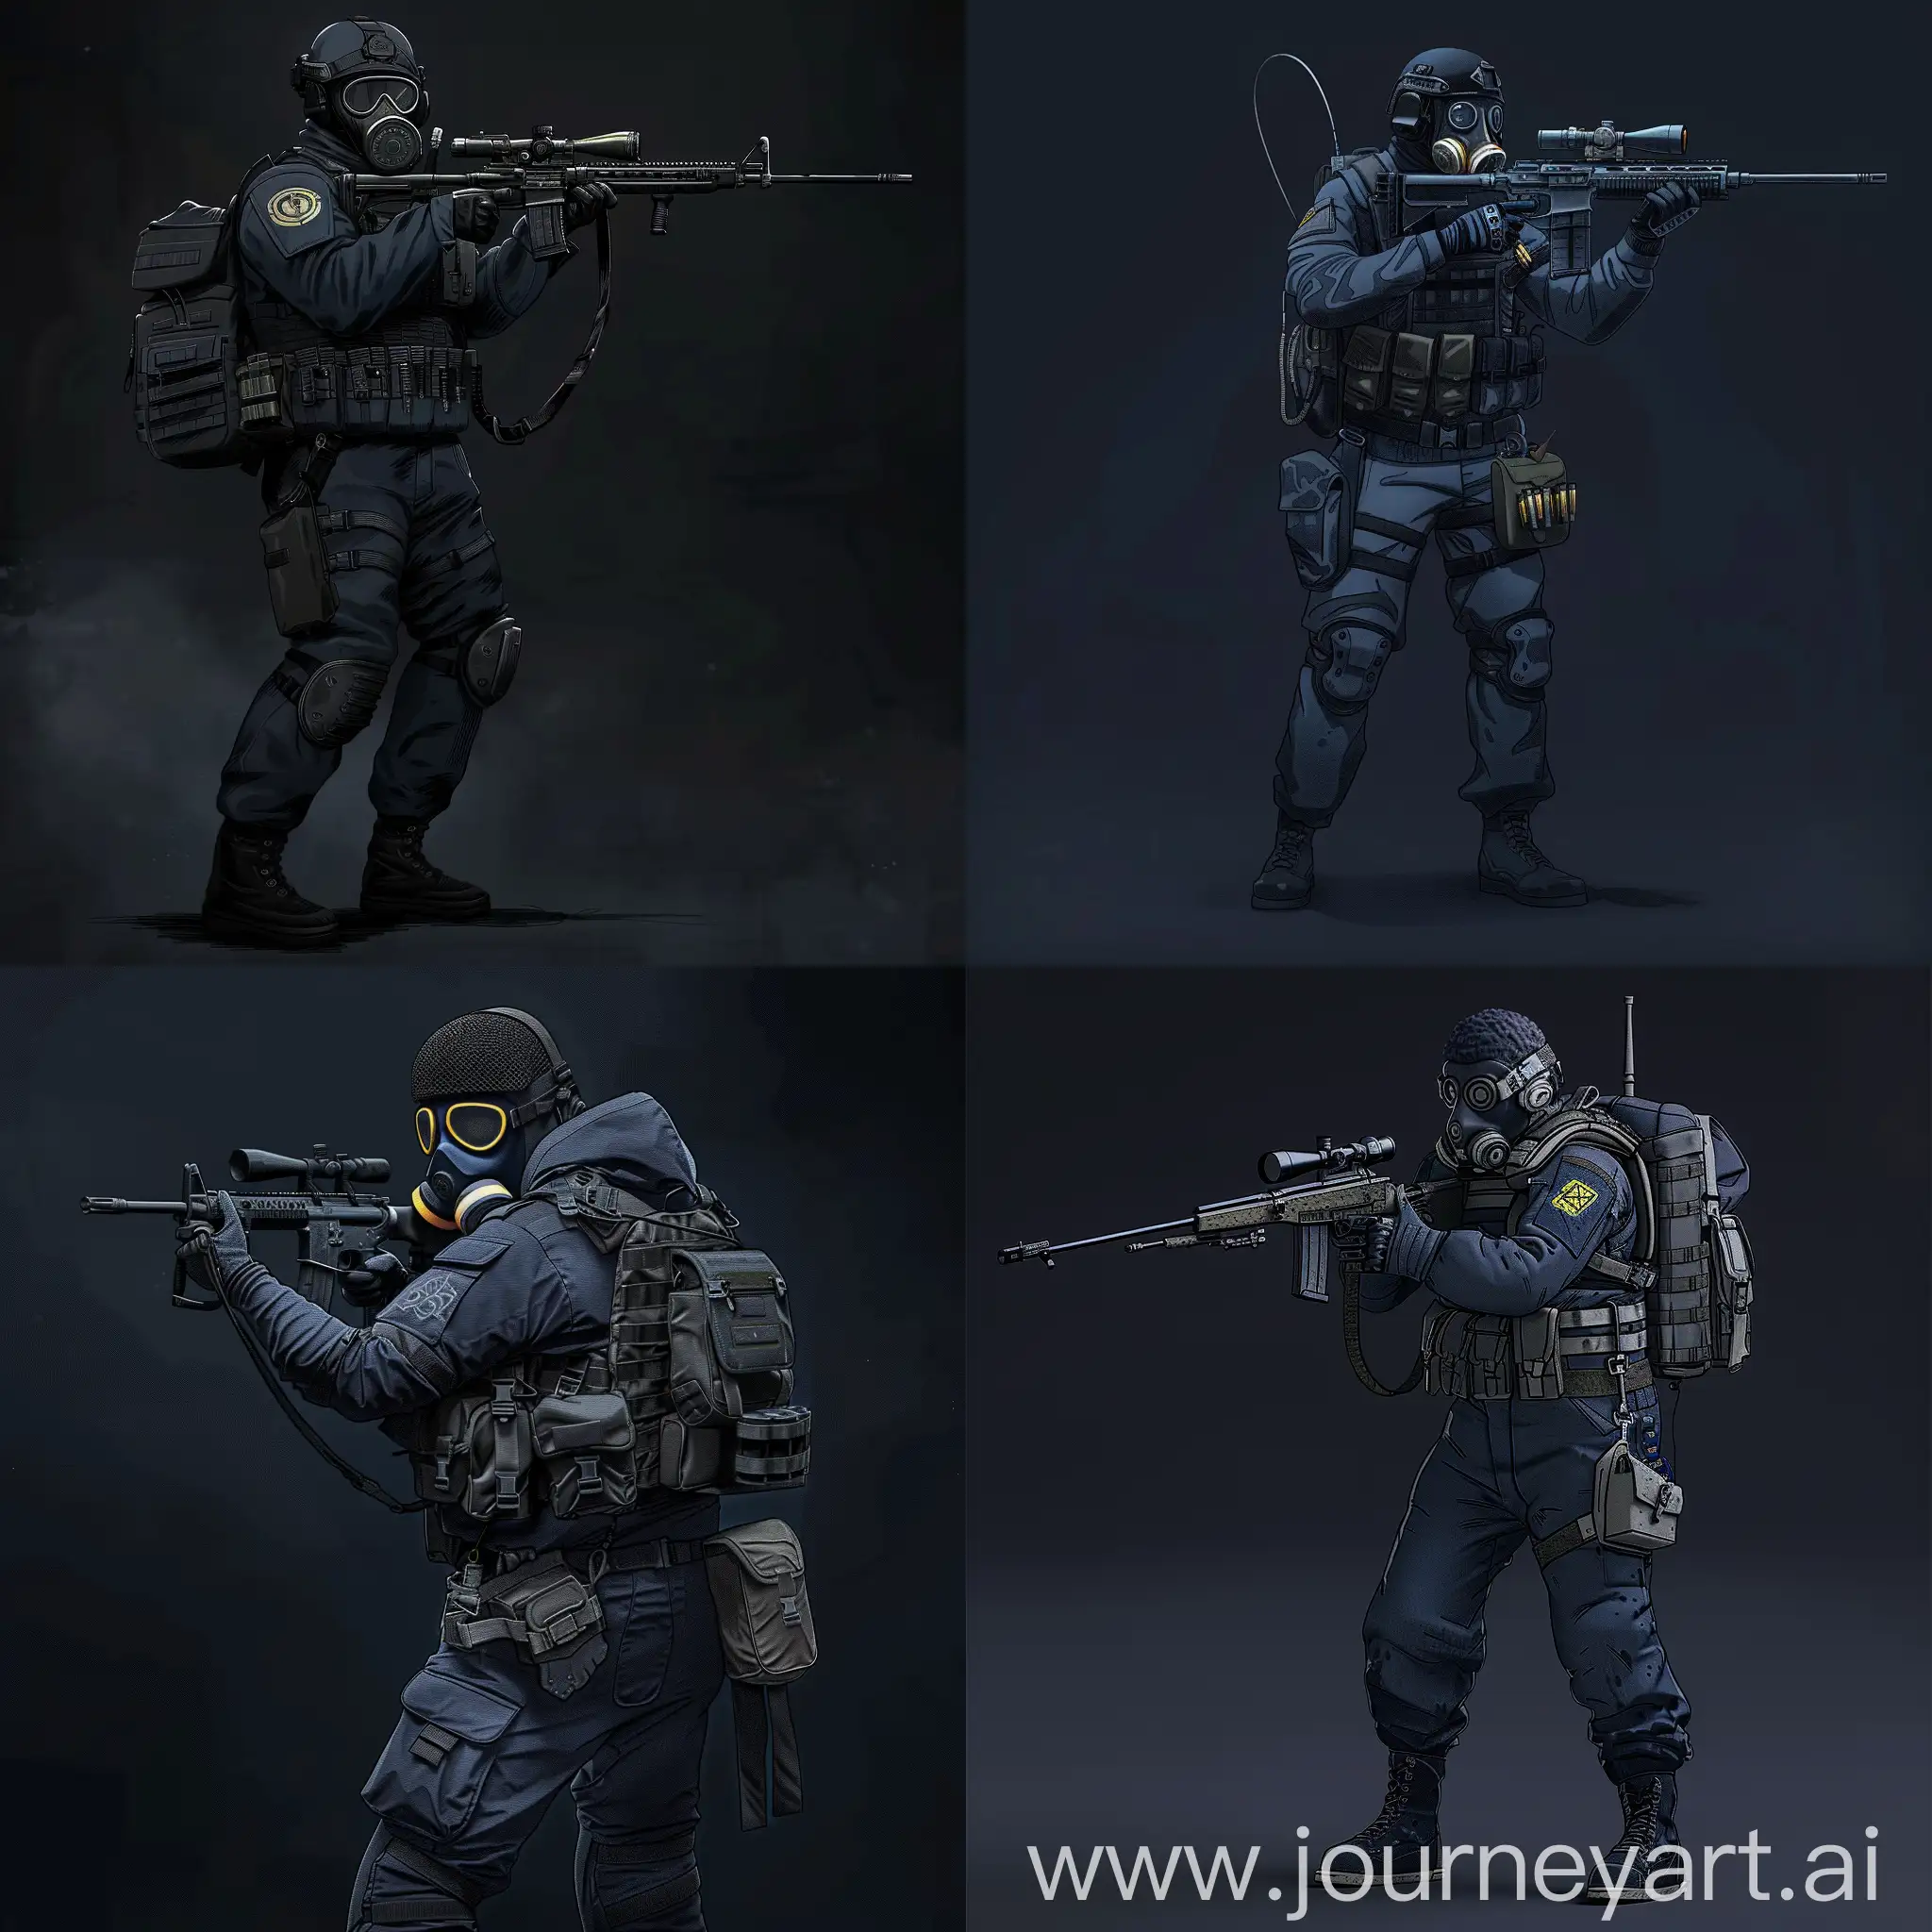 Mercenary in dark blue uniform, gasmask, sniper rifle in his hands, a small backpack on his back.